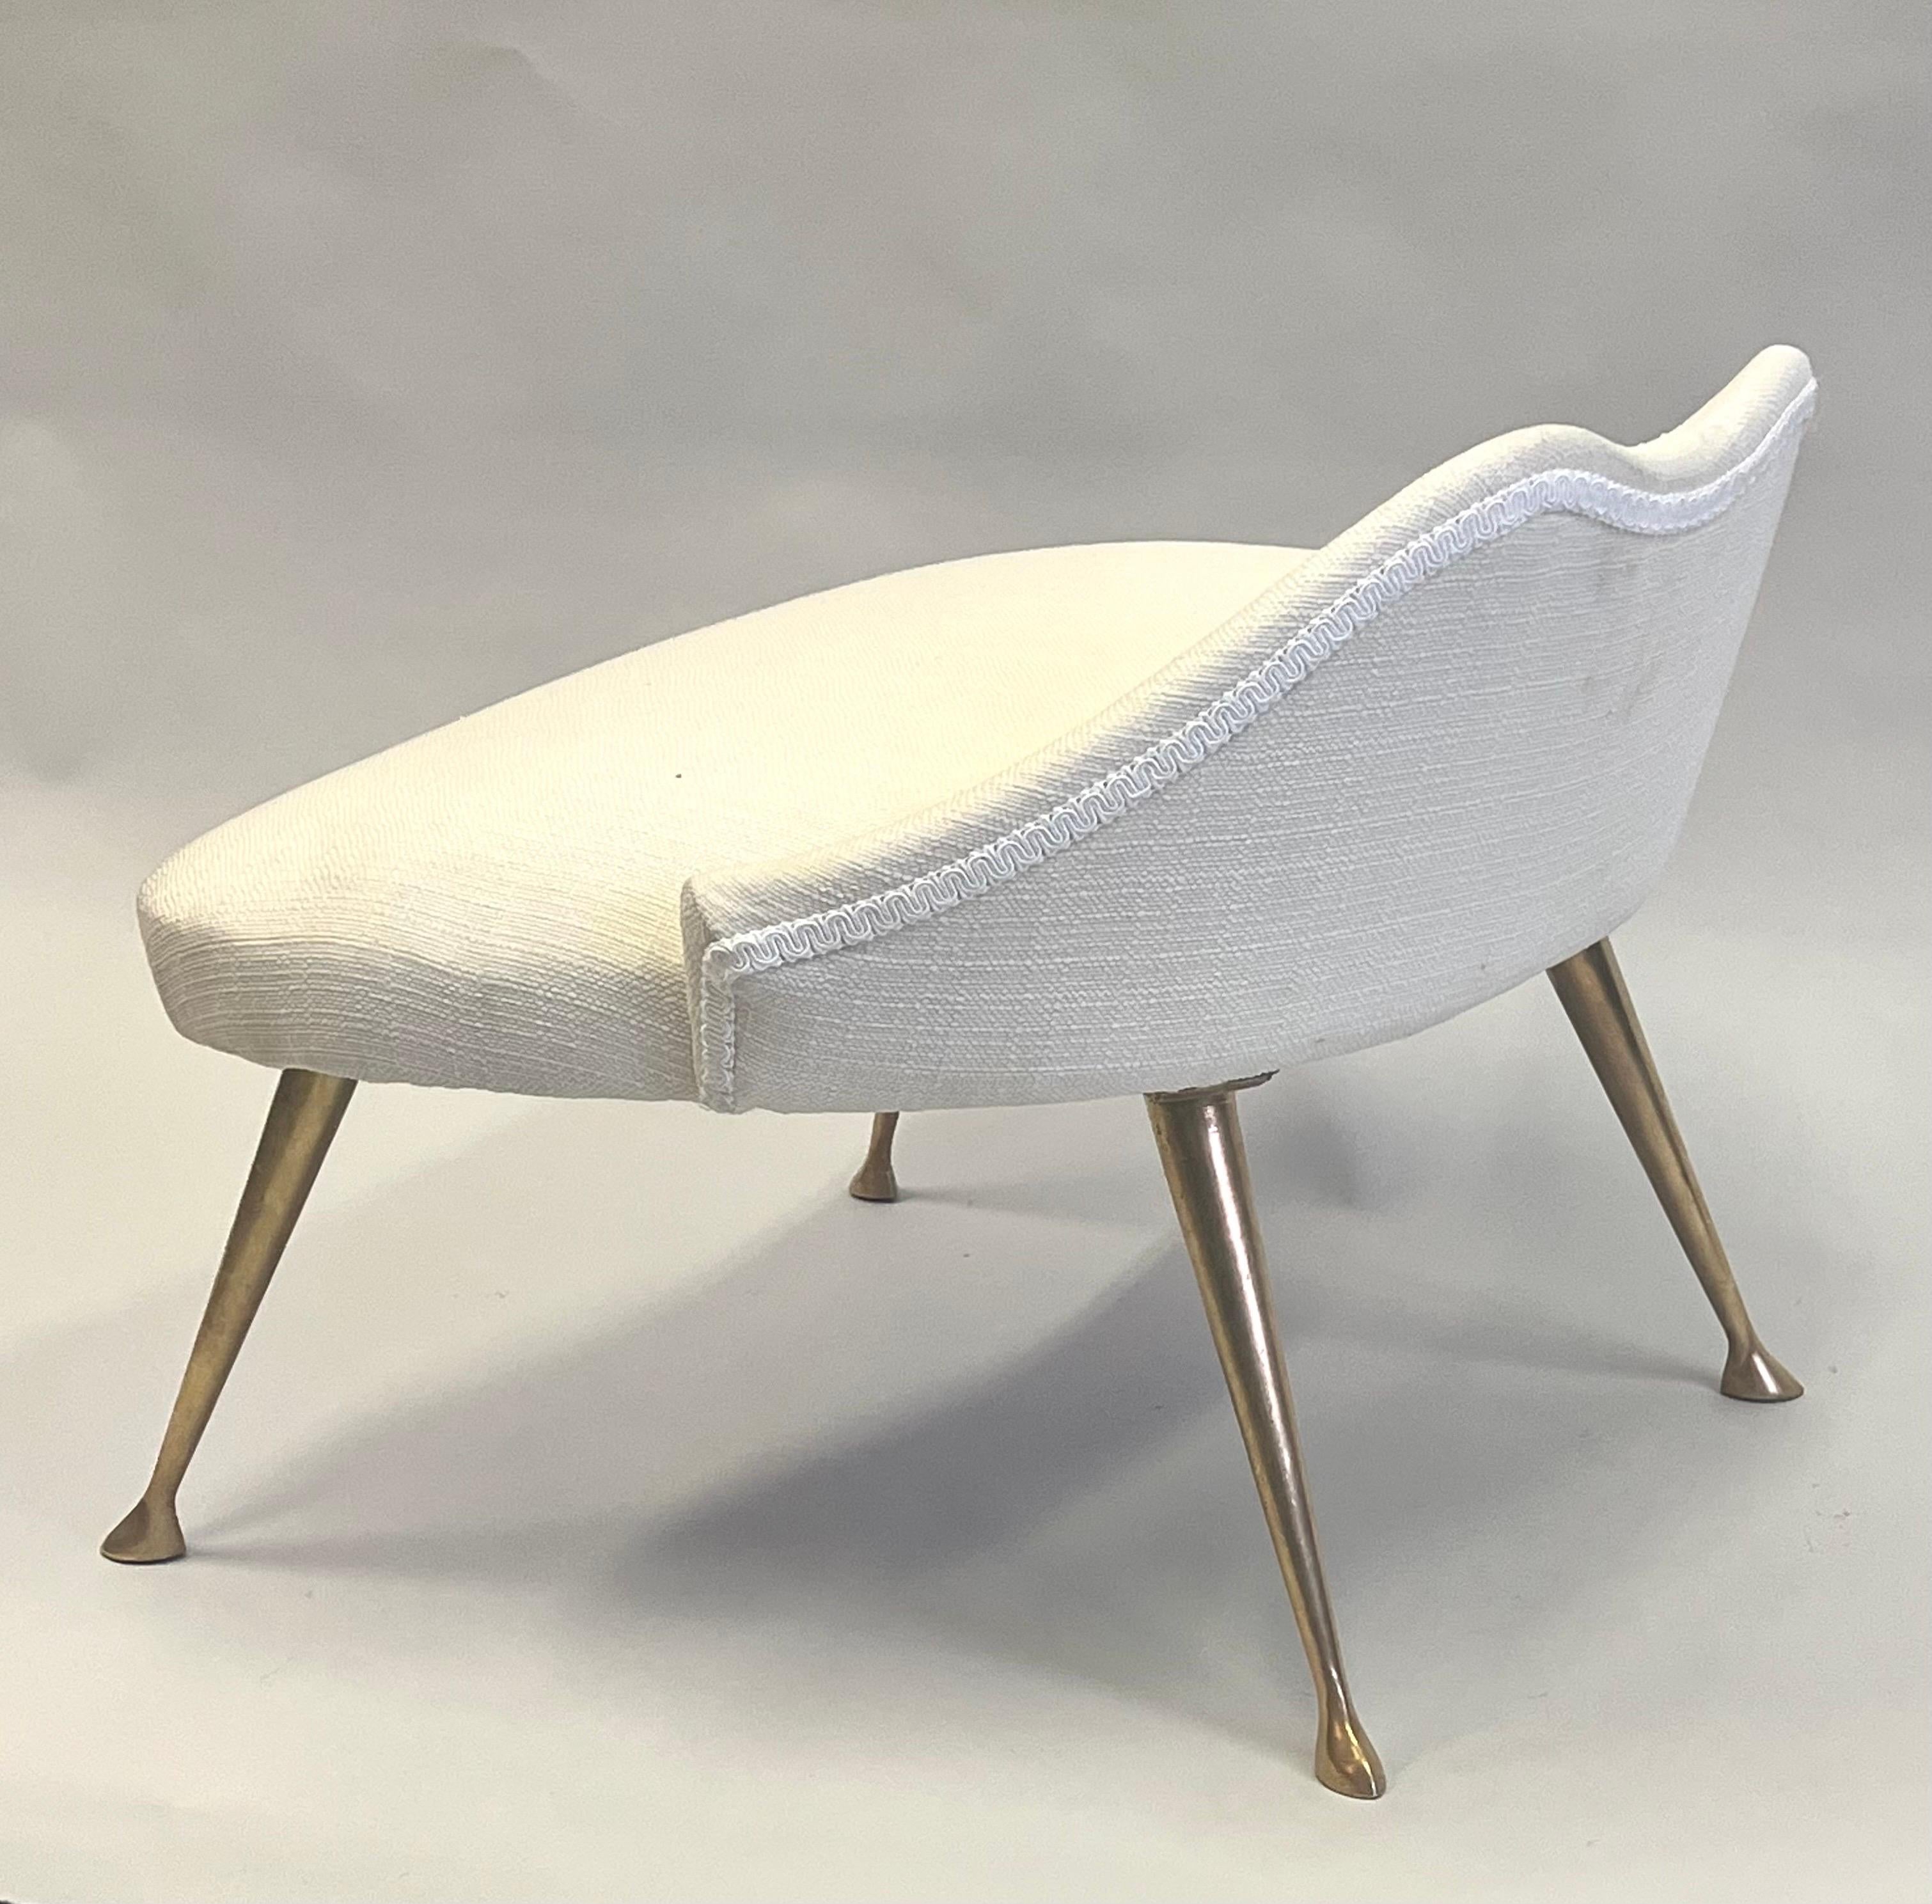 20th Century Italian Mid-CenturyModern Brass & Cotton Vanity Chair Attributed to Marco Zanuso For Sale